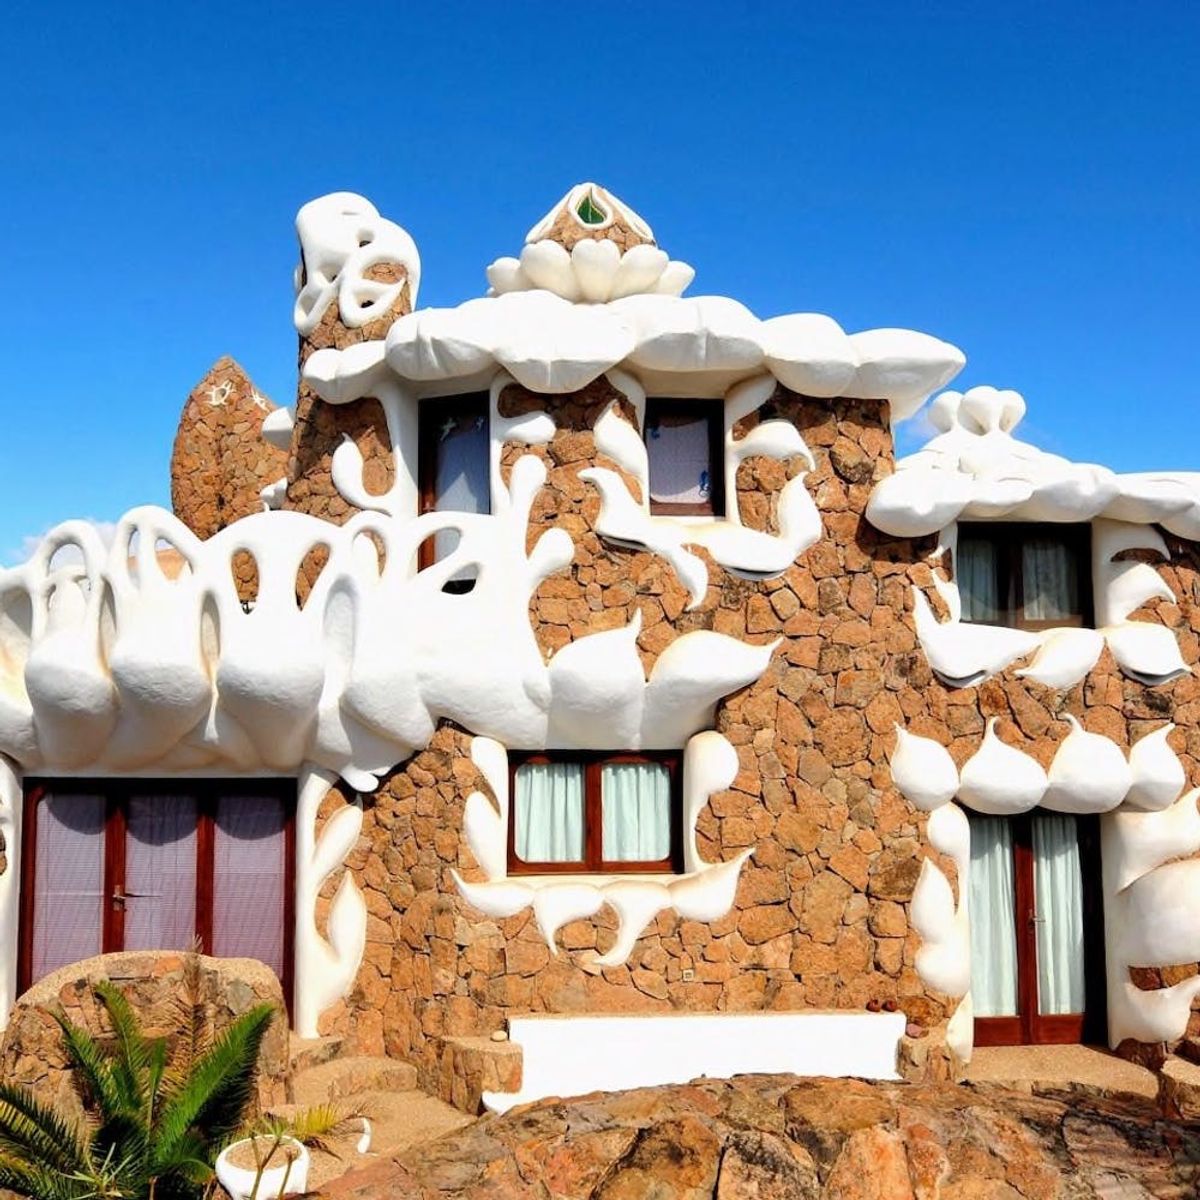 5 Airbnb Rentals That Are Basically Real Life Gingerbread Houses